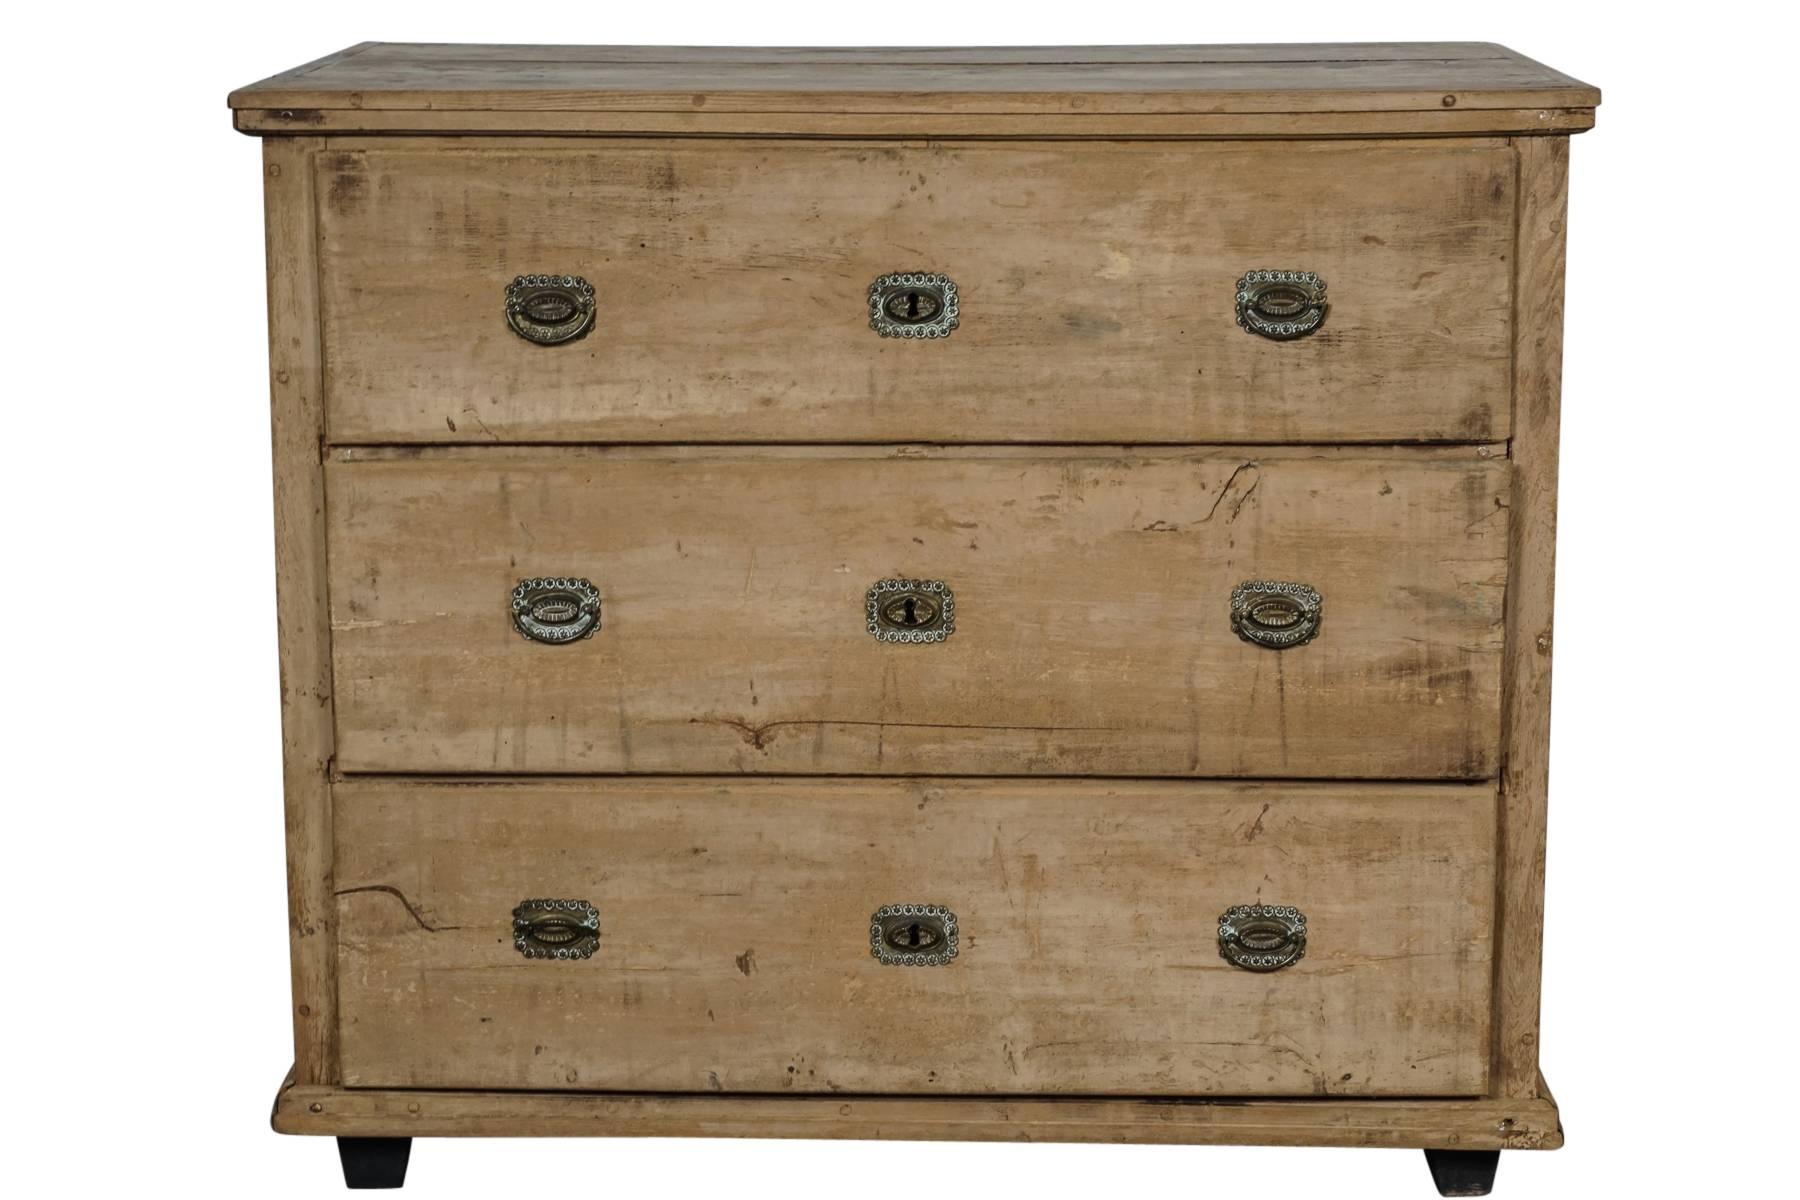 Belgian chest of drawers with original surface, circa 1890. Pine construction with three drawers and original hardware.